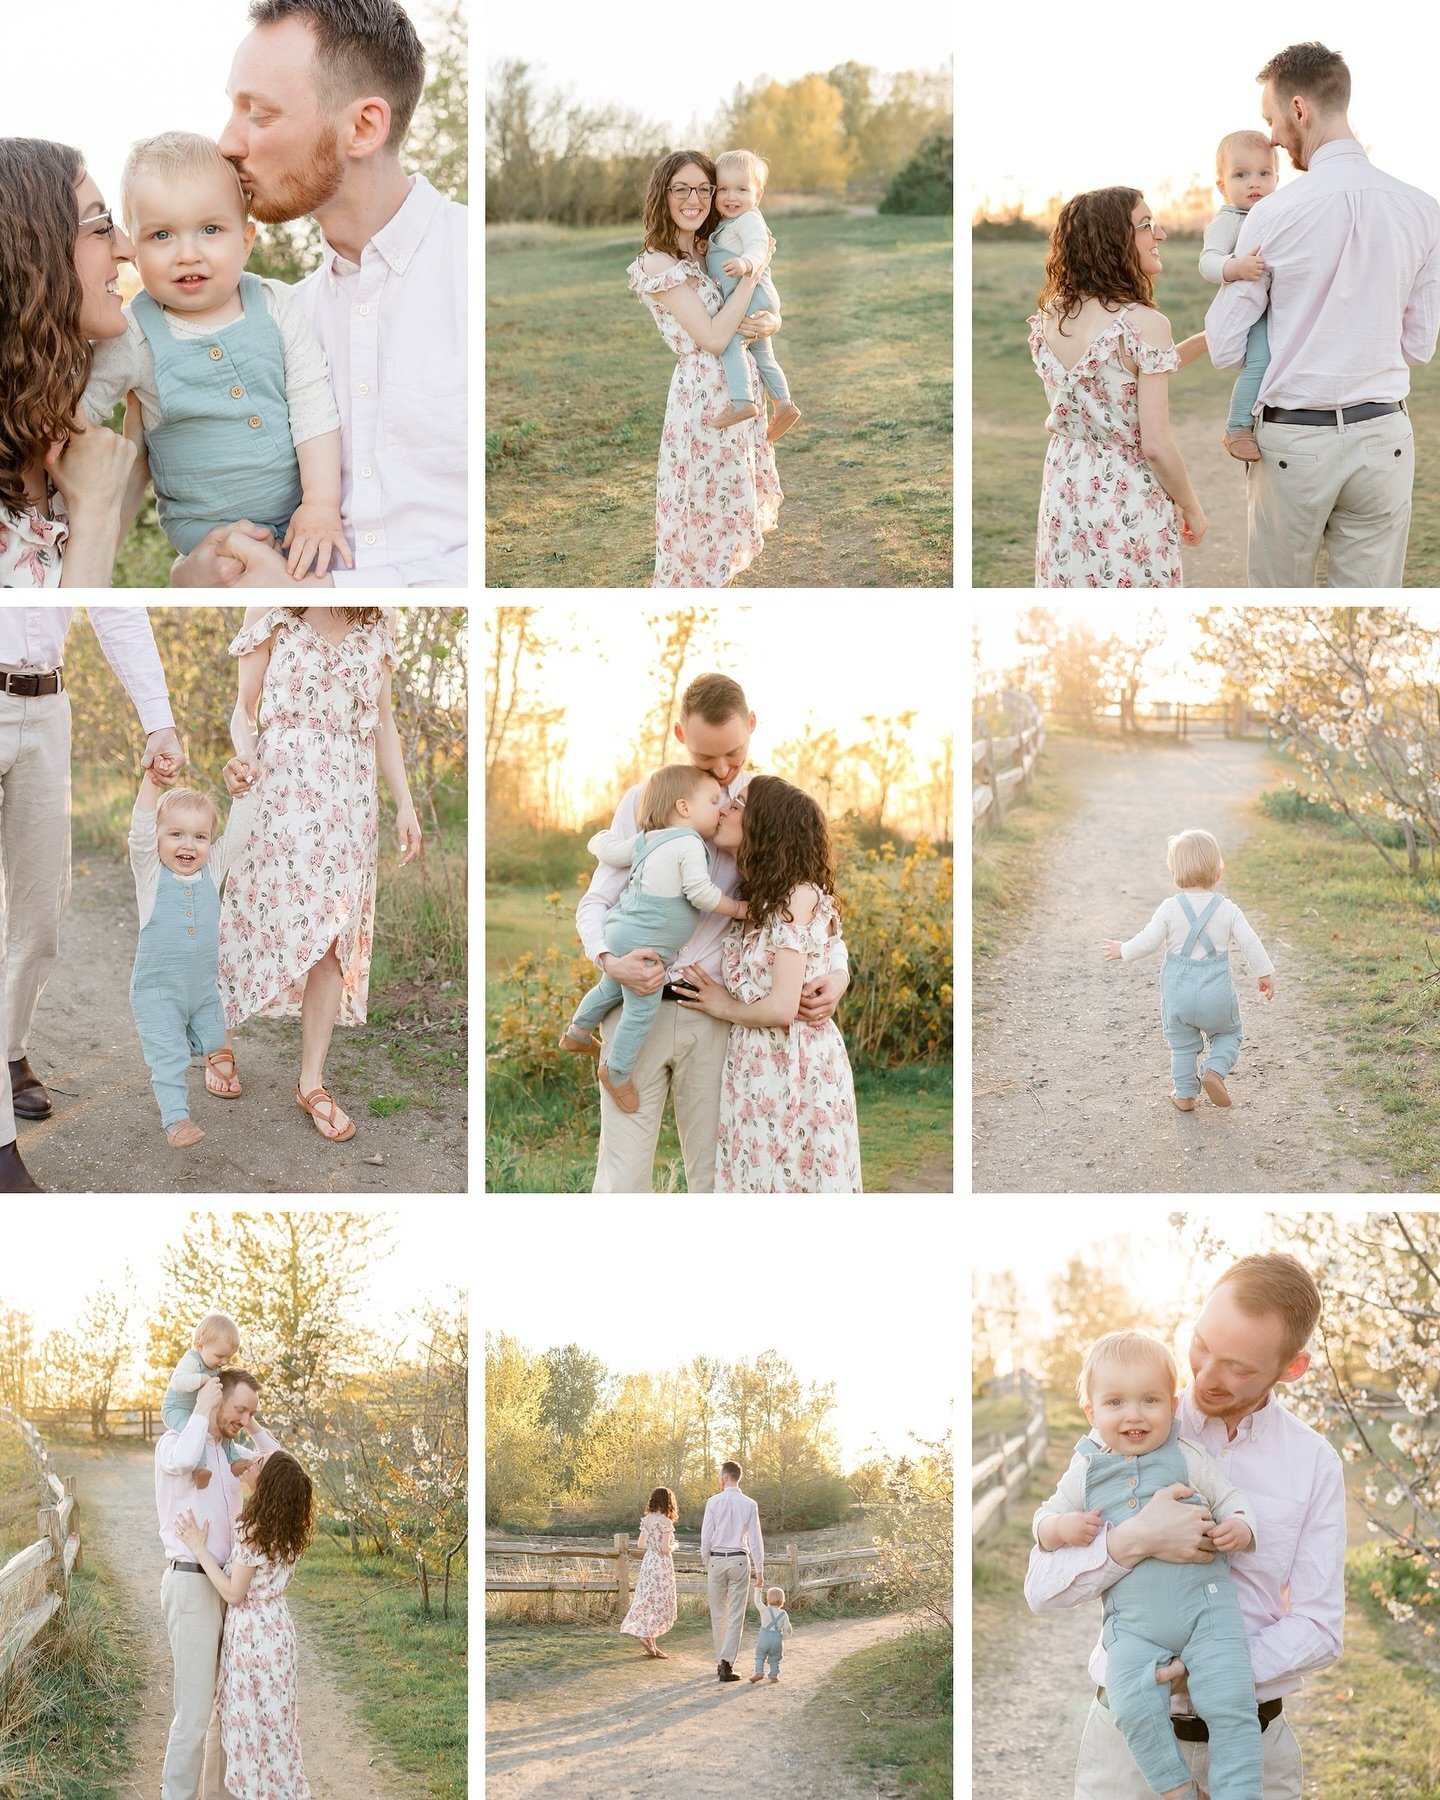 Oh my goodness this family 🥰 I had such a wonderful photo session with them this weekend. So much love and laughter. This is my third time taking photos with them and I love all of our time together and documenting their little dude as he grows 🌿 @